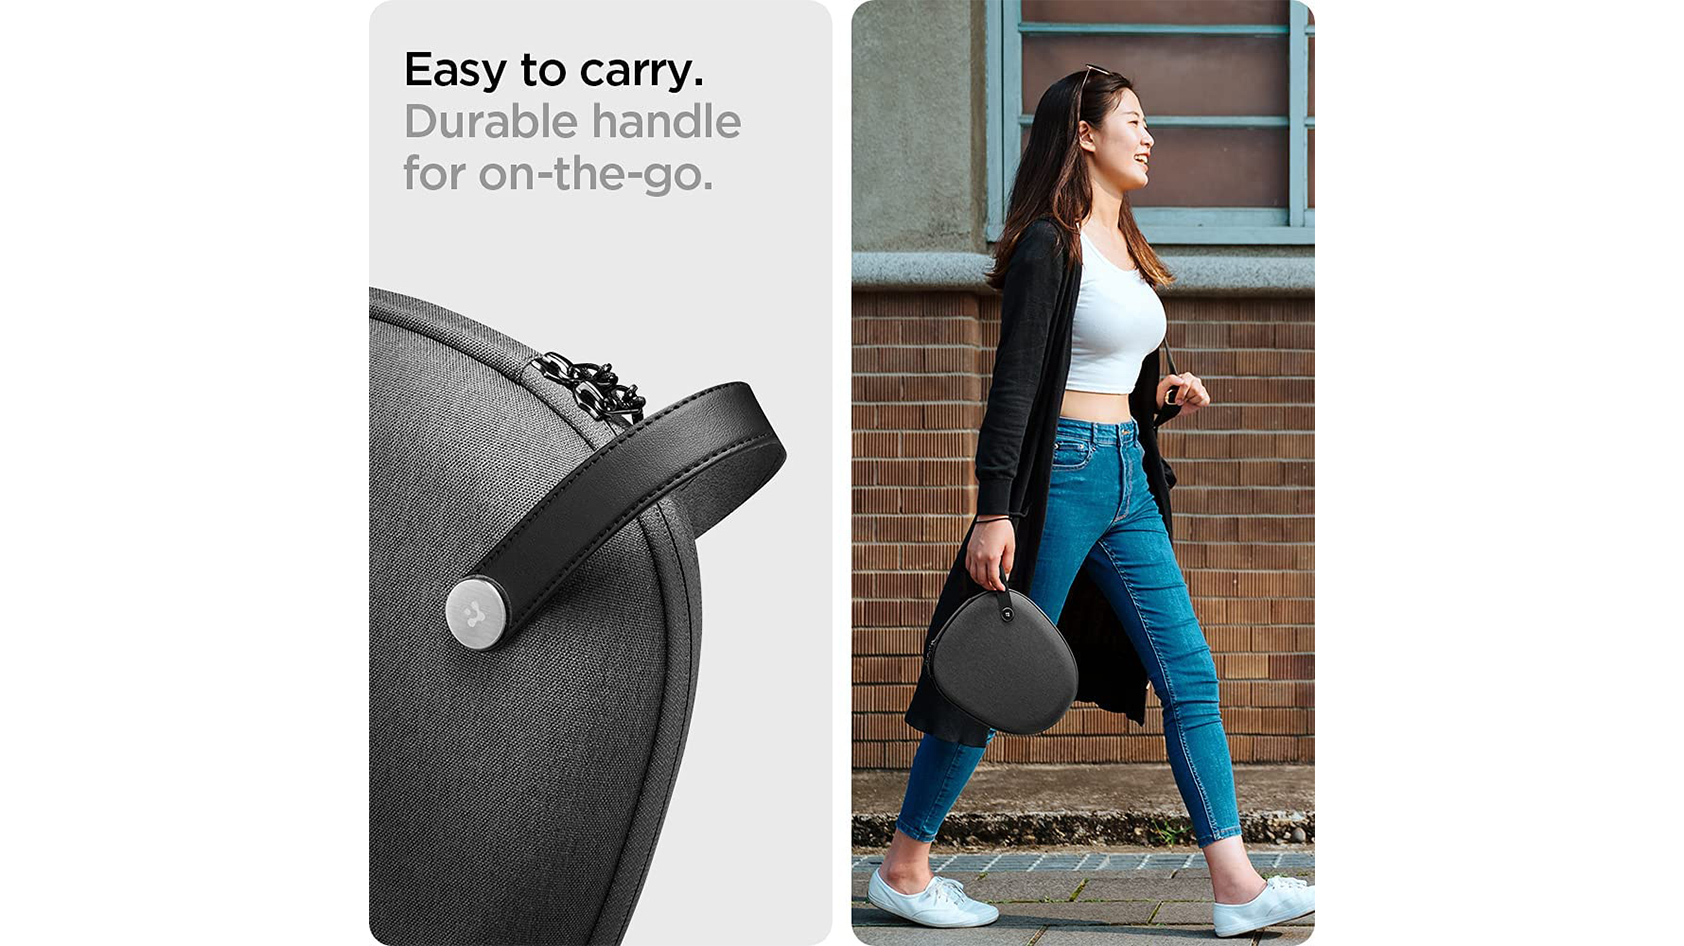 A feminine person carries the Spigen Klasden AirPods Max Carrying Case juxtaposed next to an image of the case's carry loop.